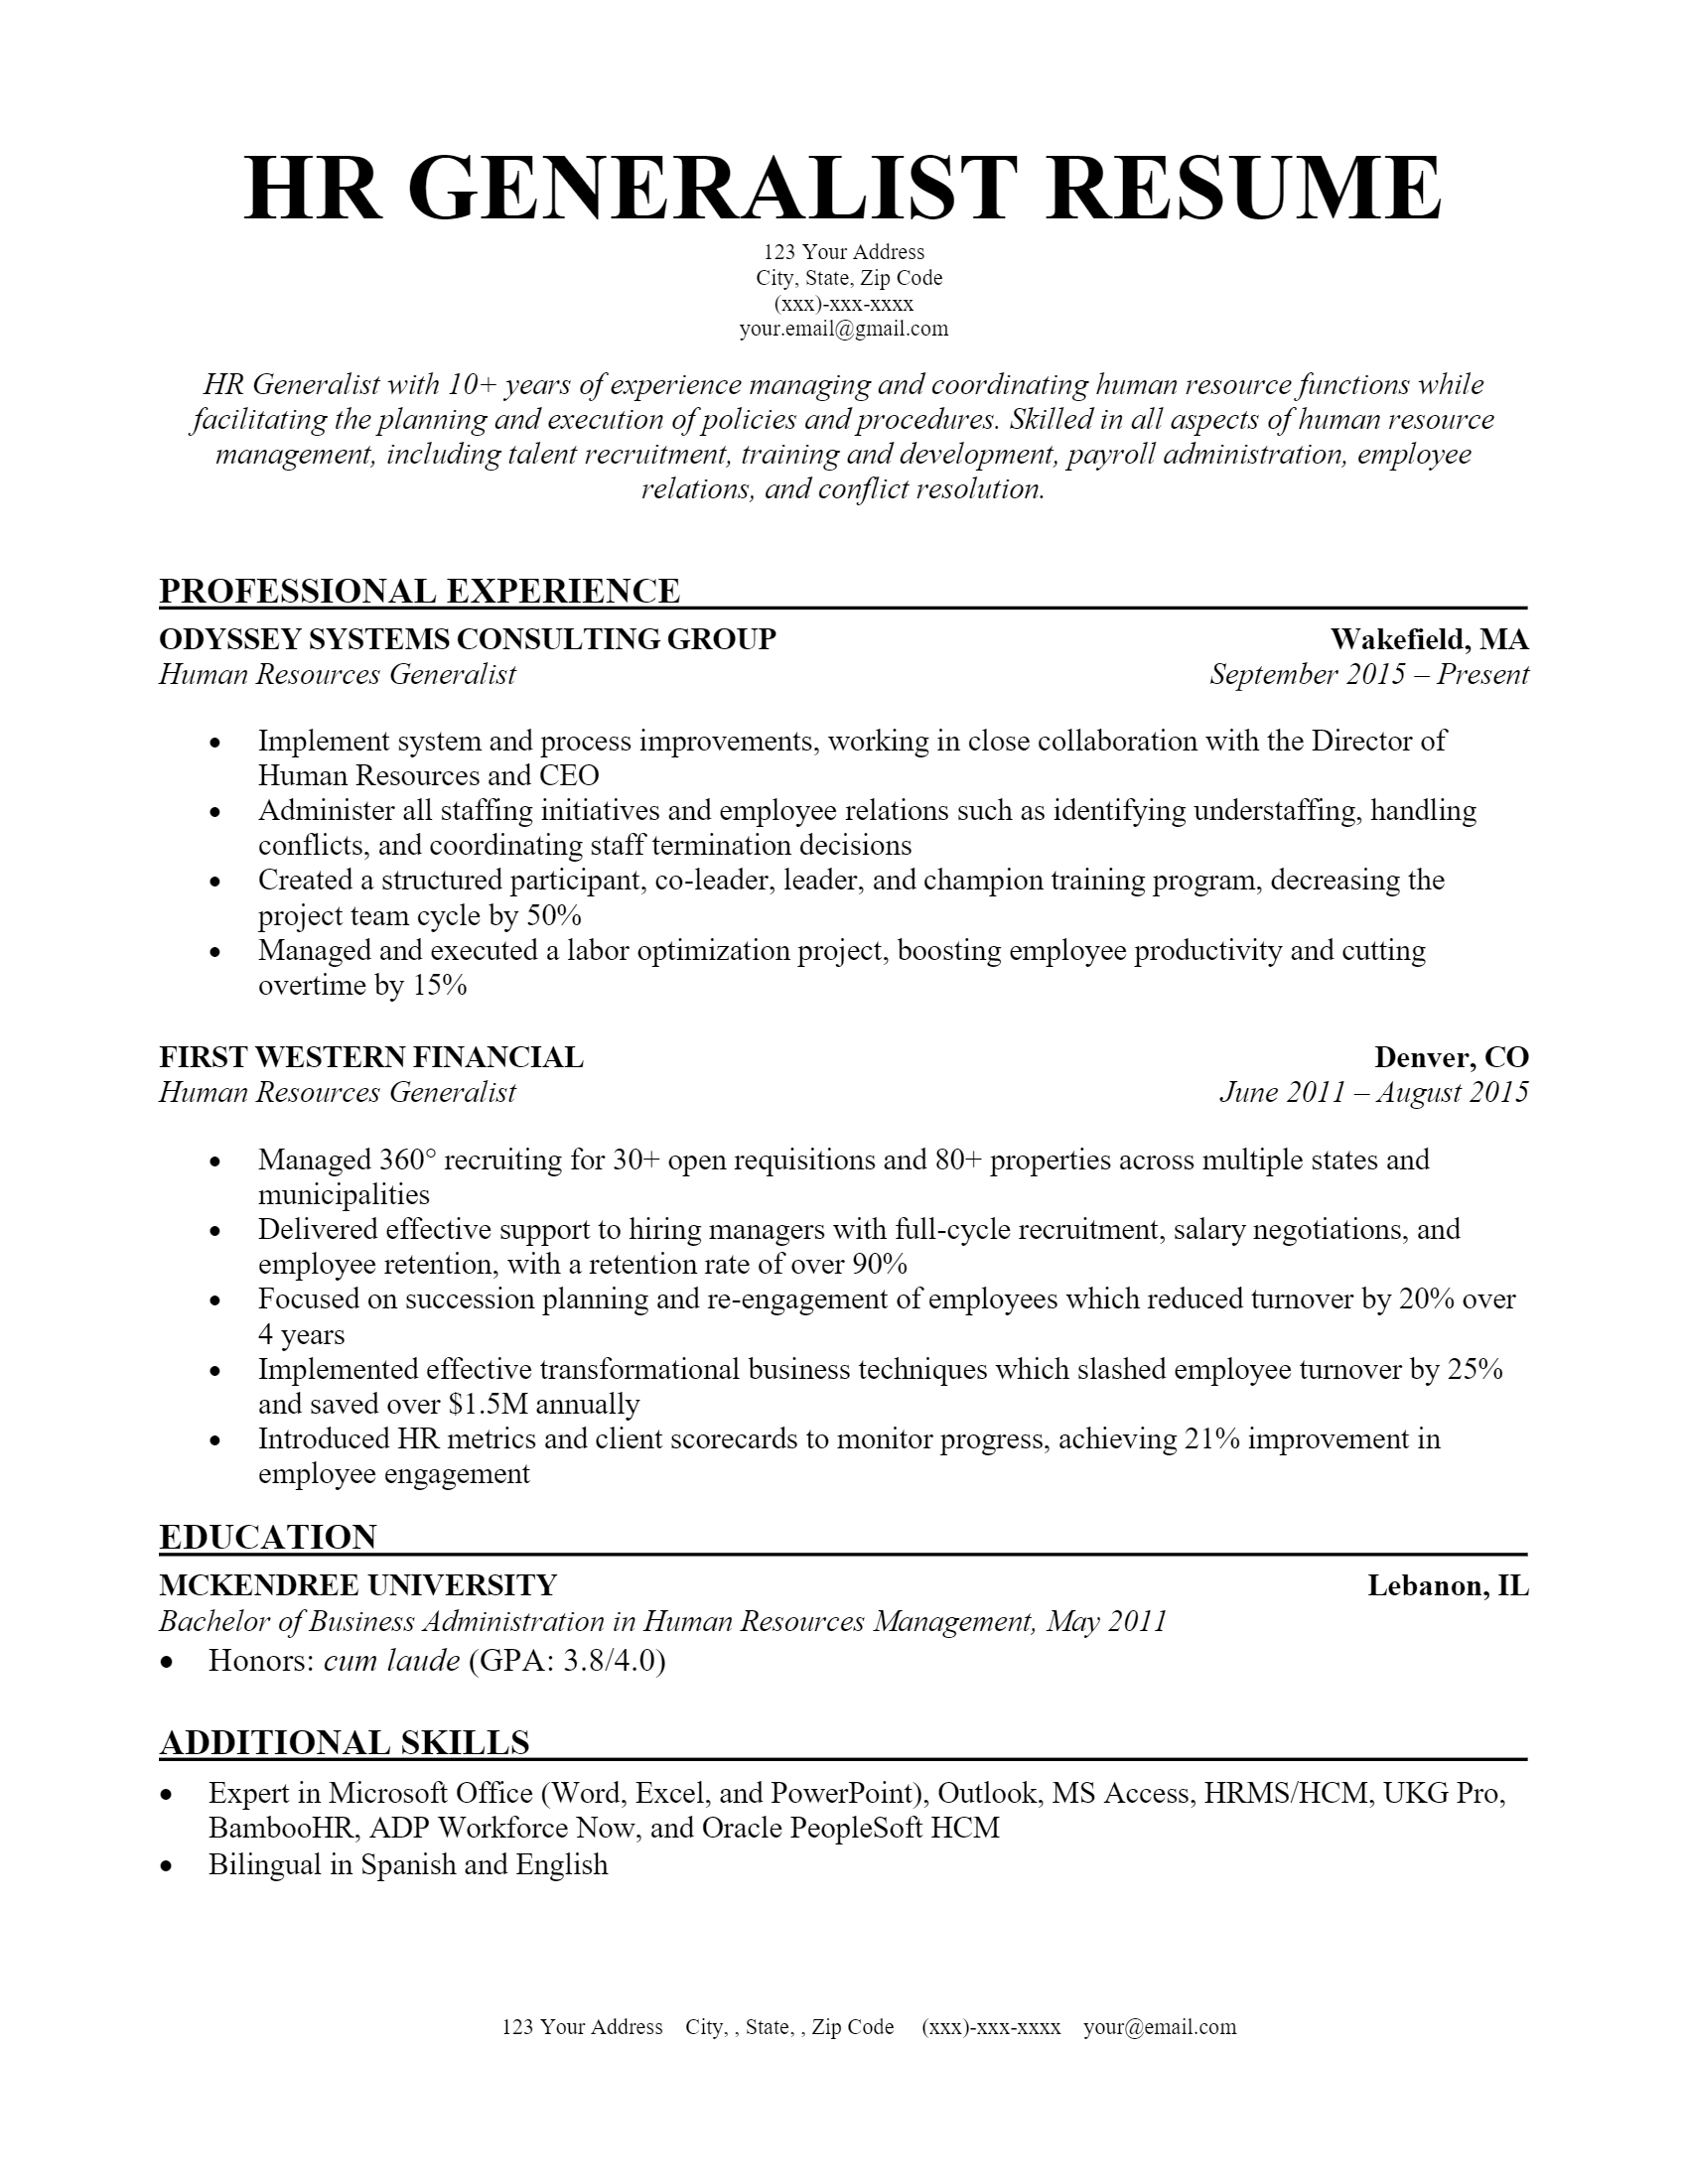 resume summary for human resources generalist